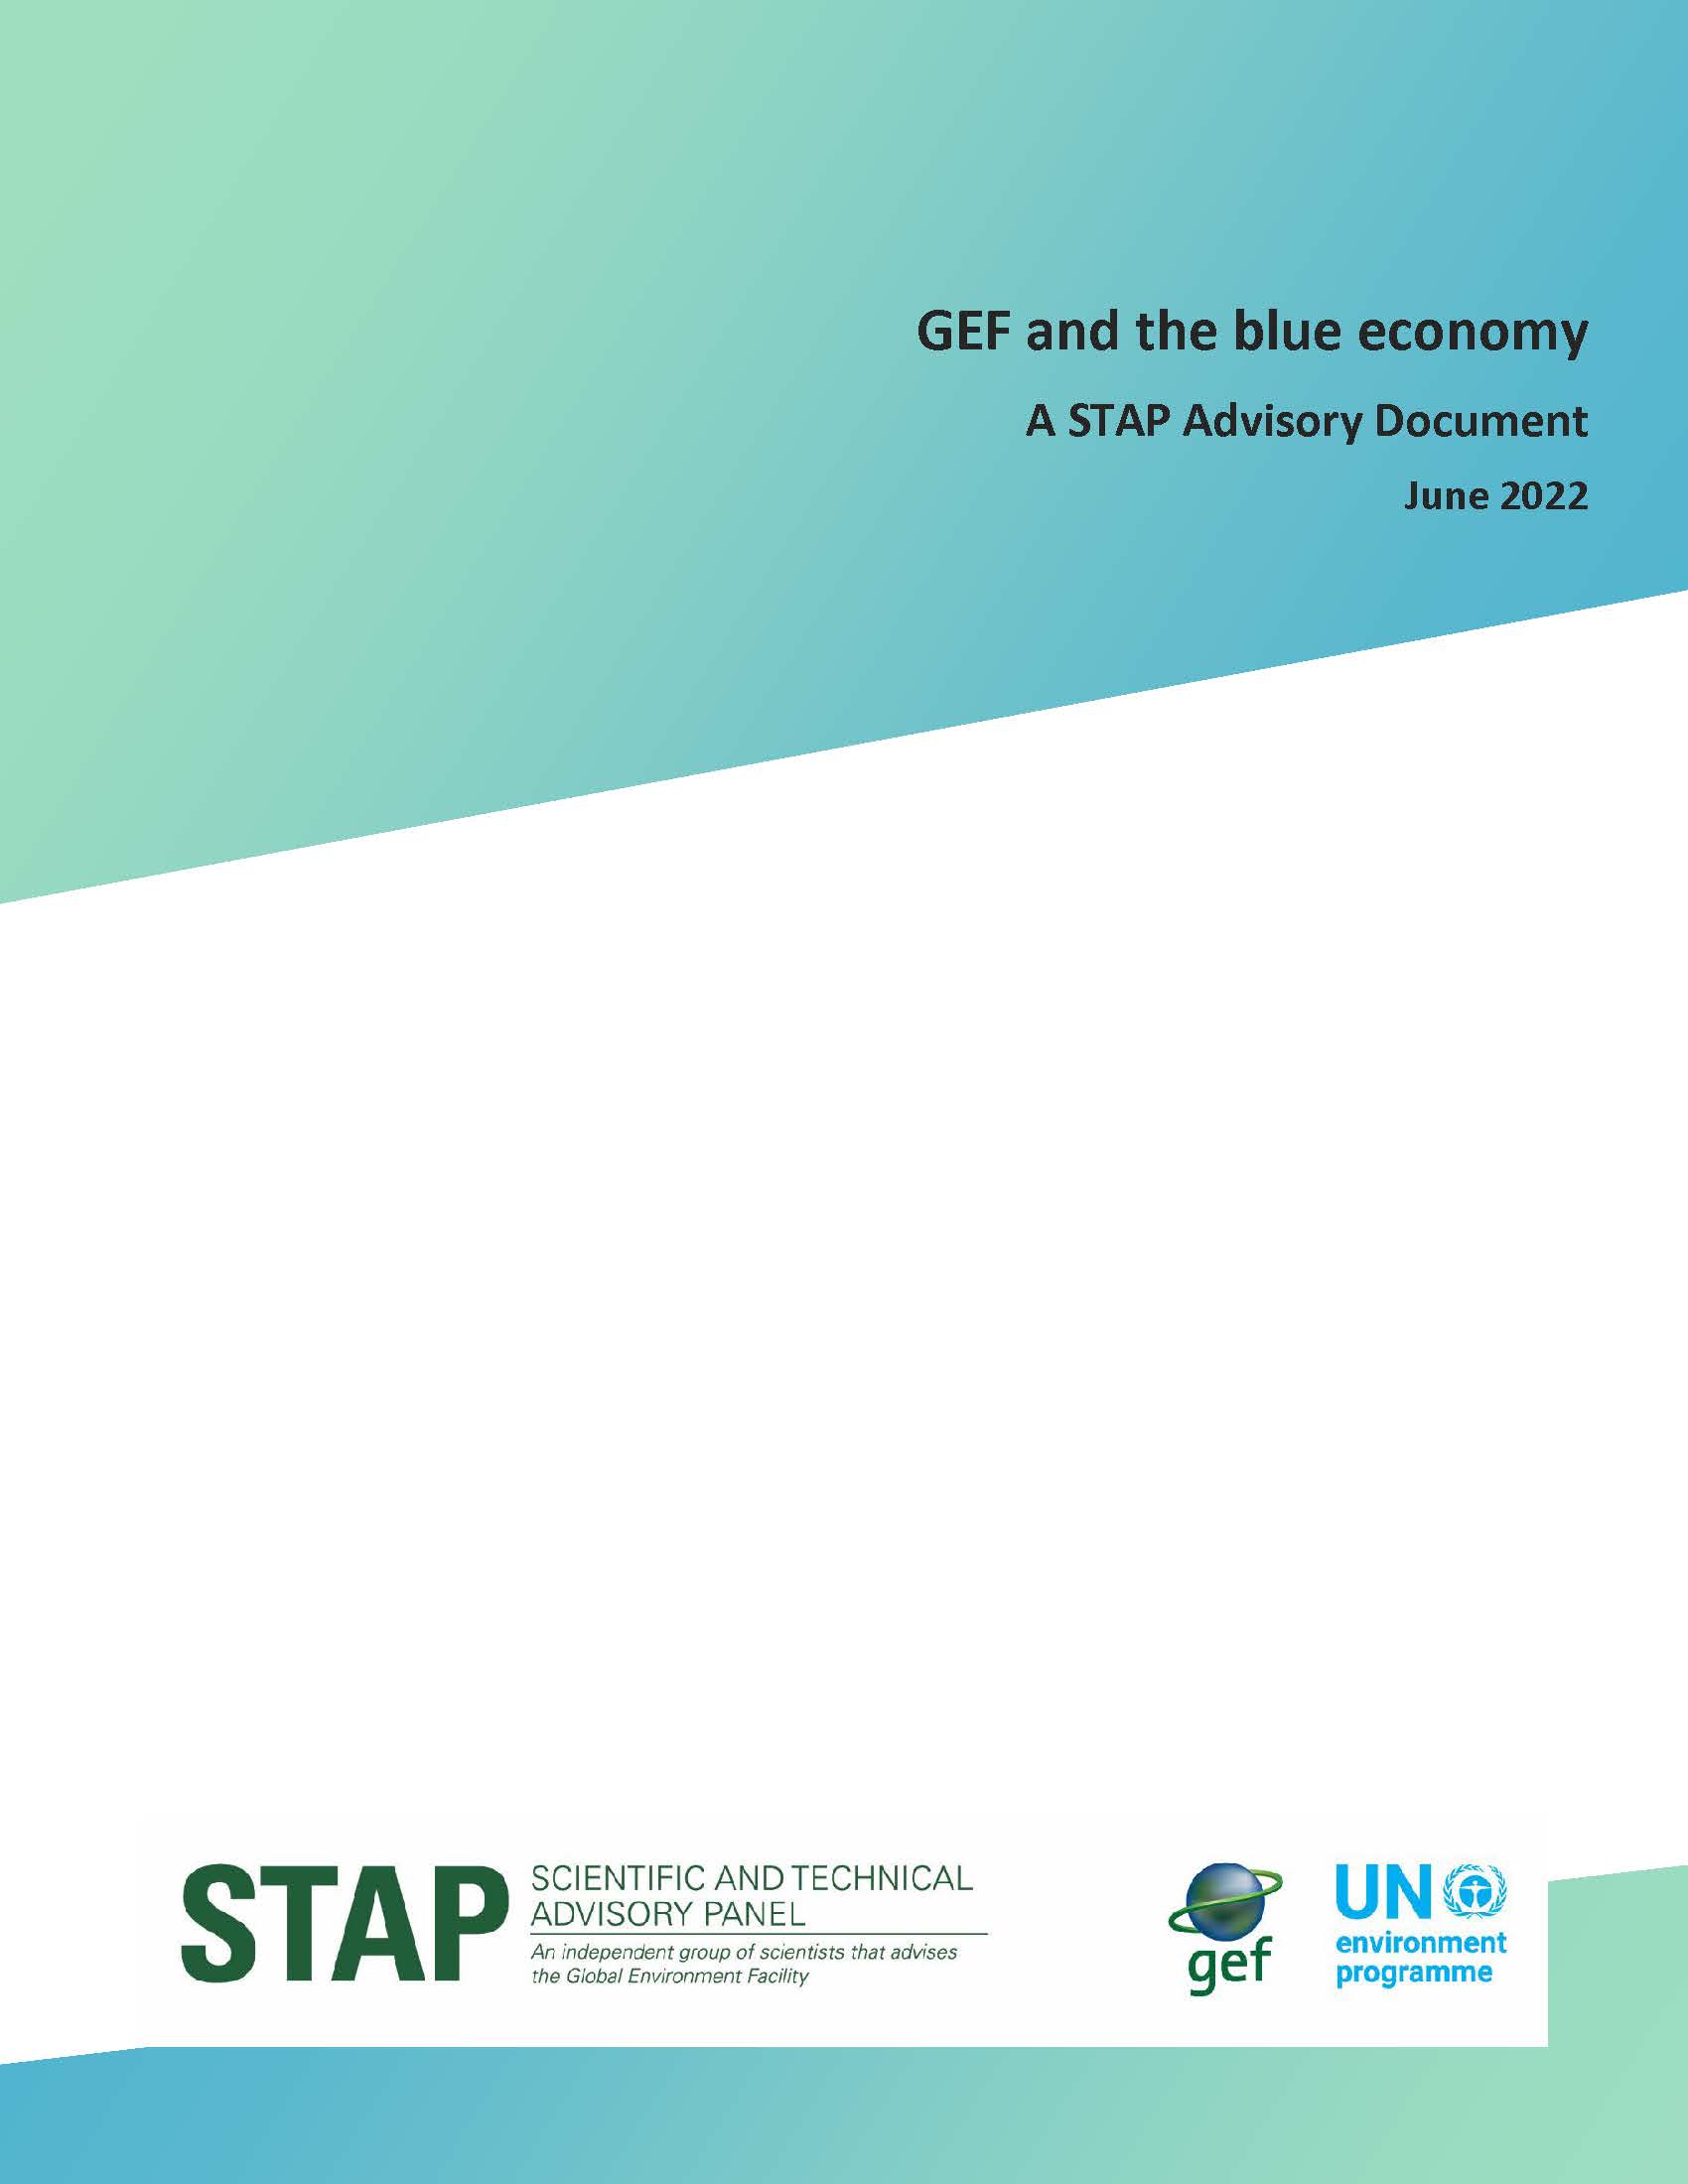 GEF and the Blue Economy